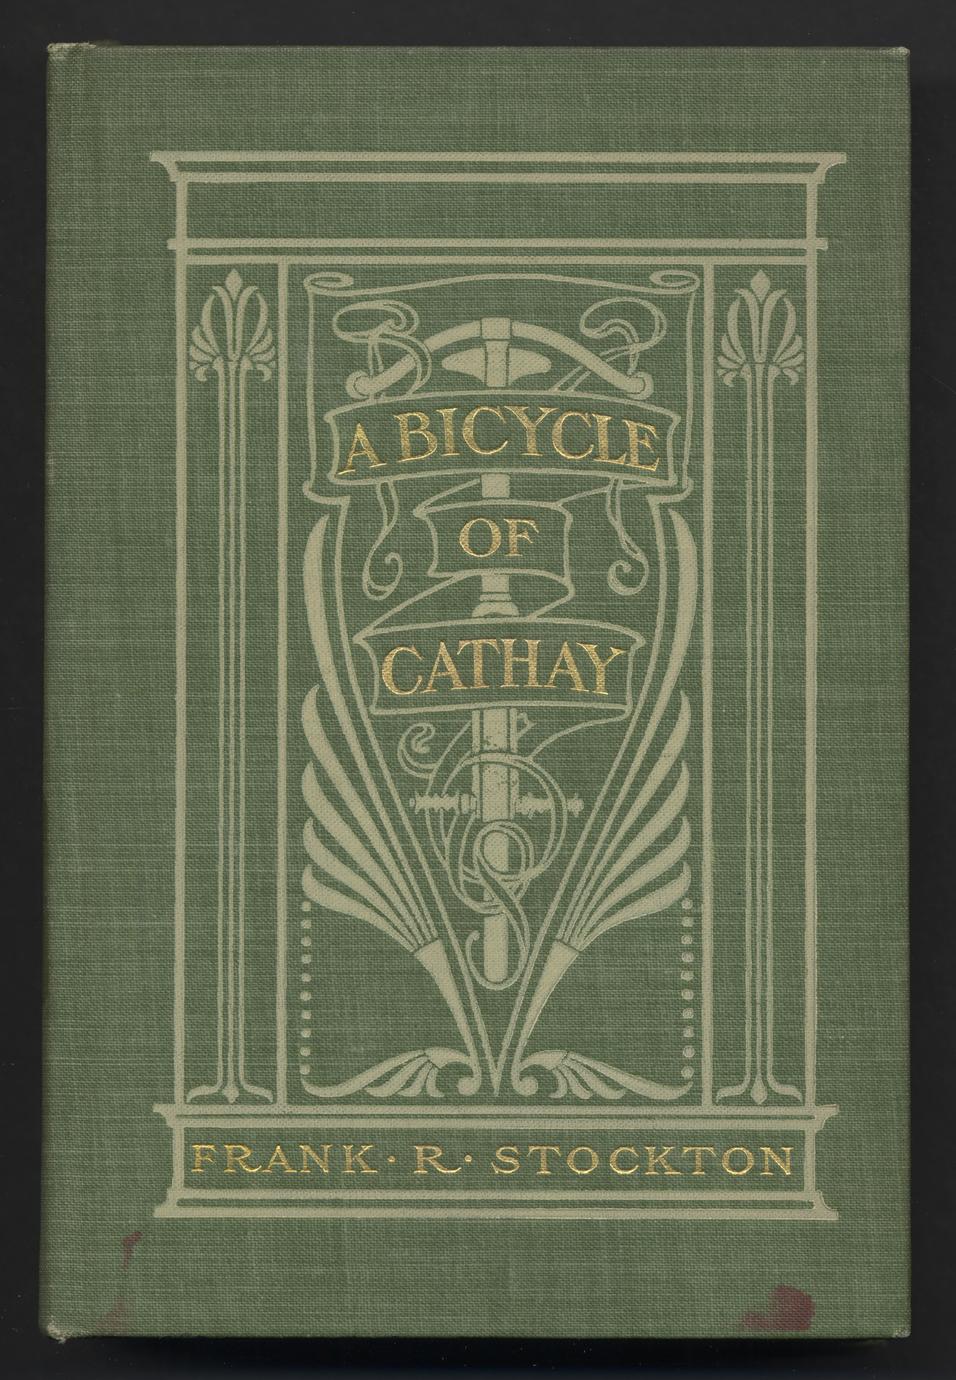 A bicycle of Cathay (1 of 2)